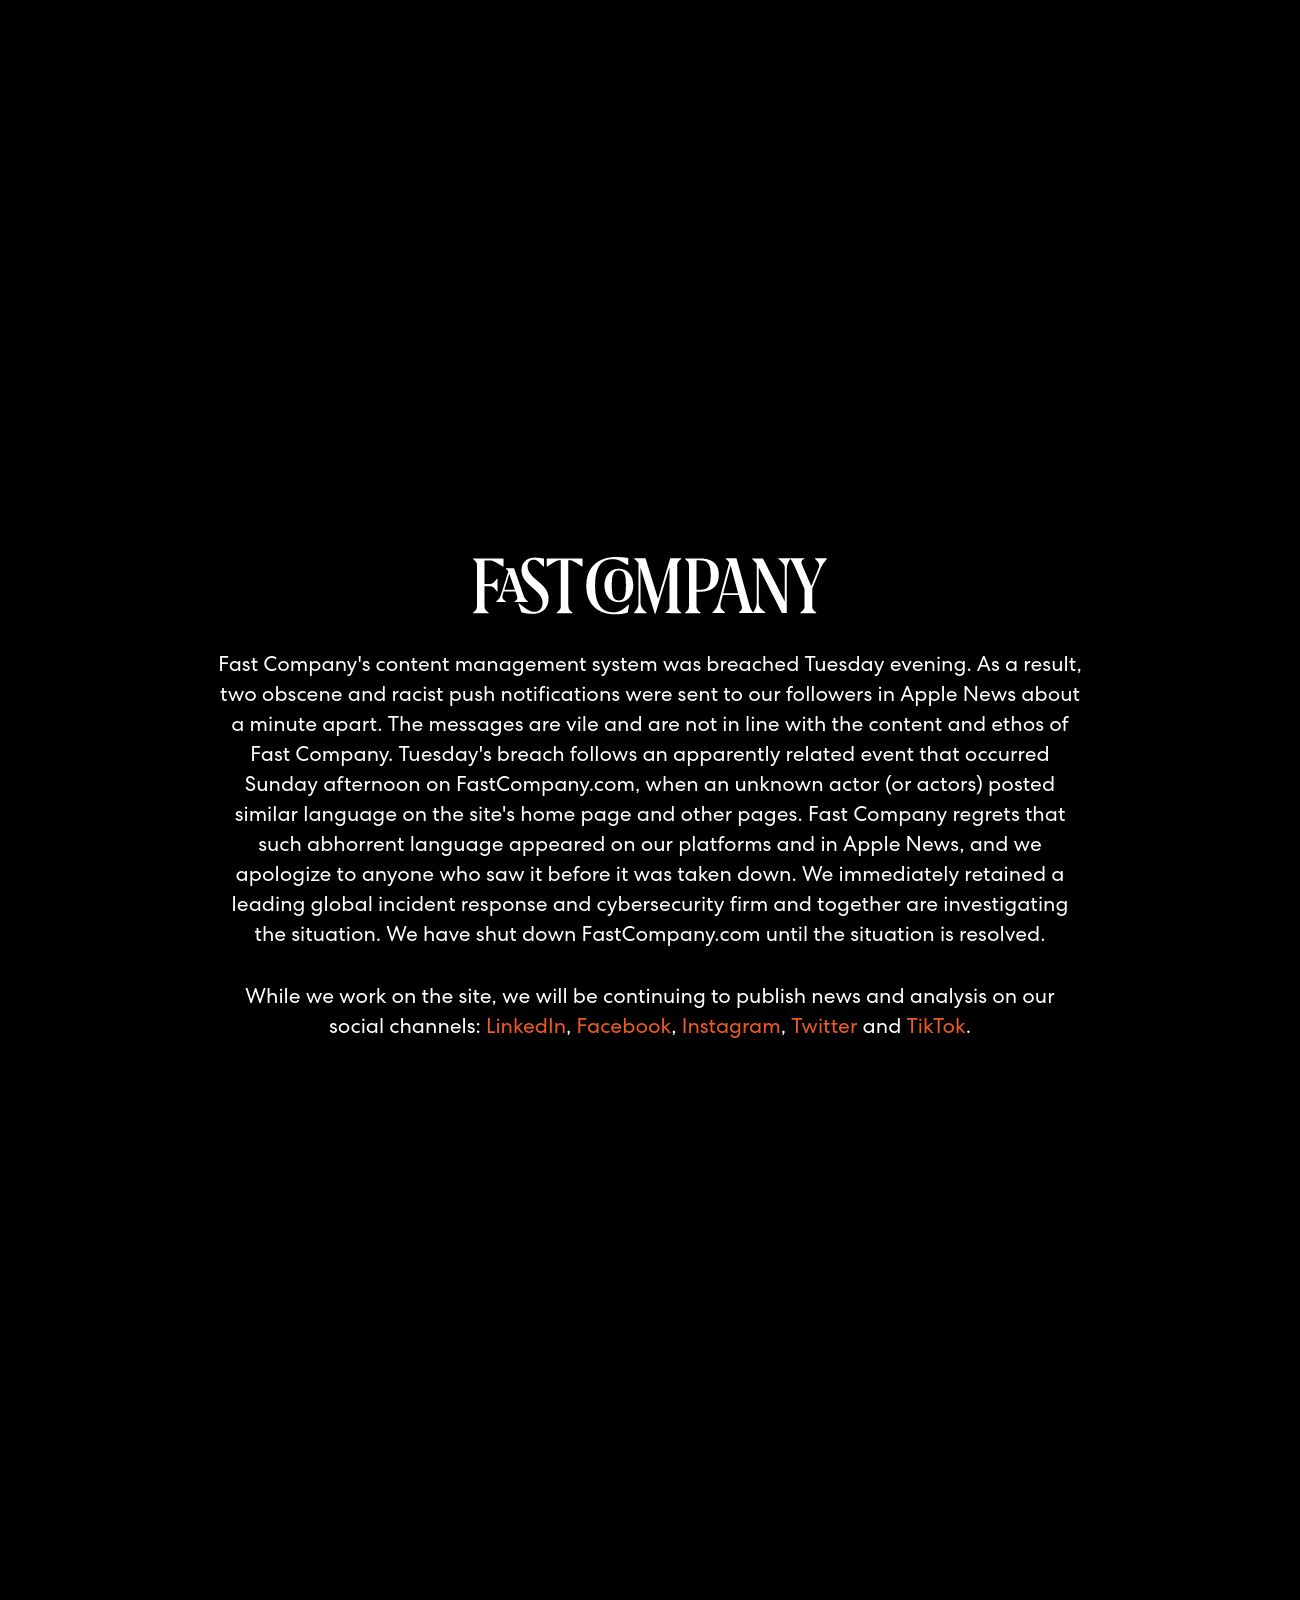 Fast Company at 2022-10-02 01:57:04-04:00 local time